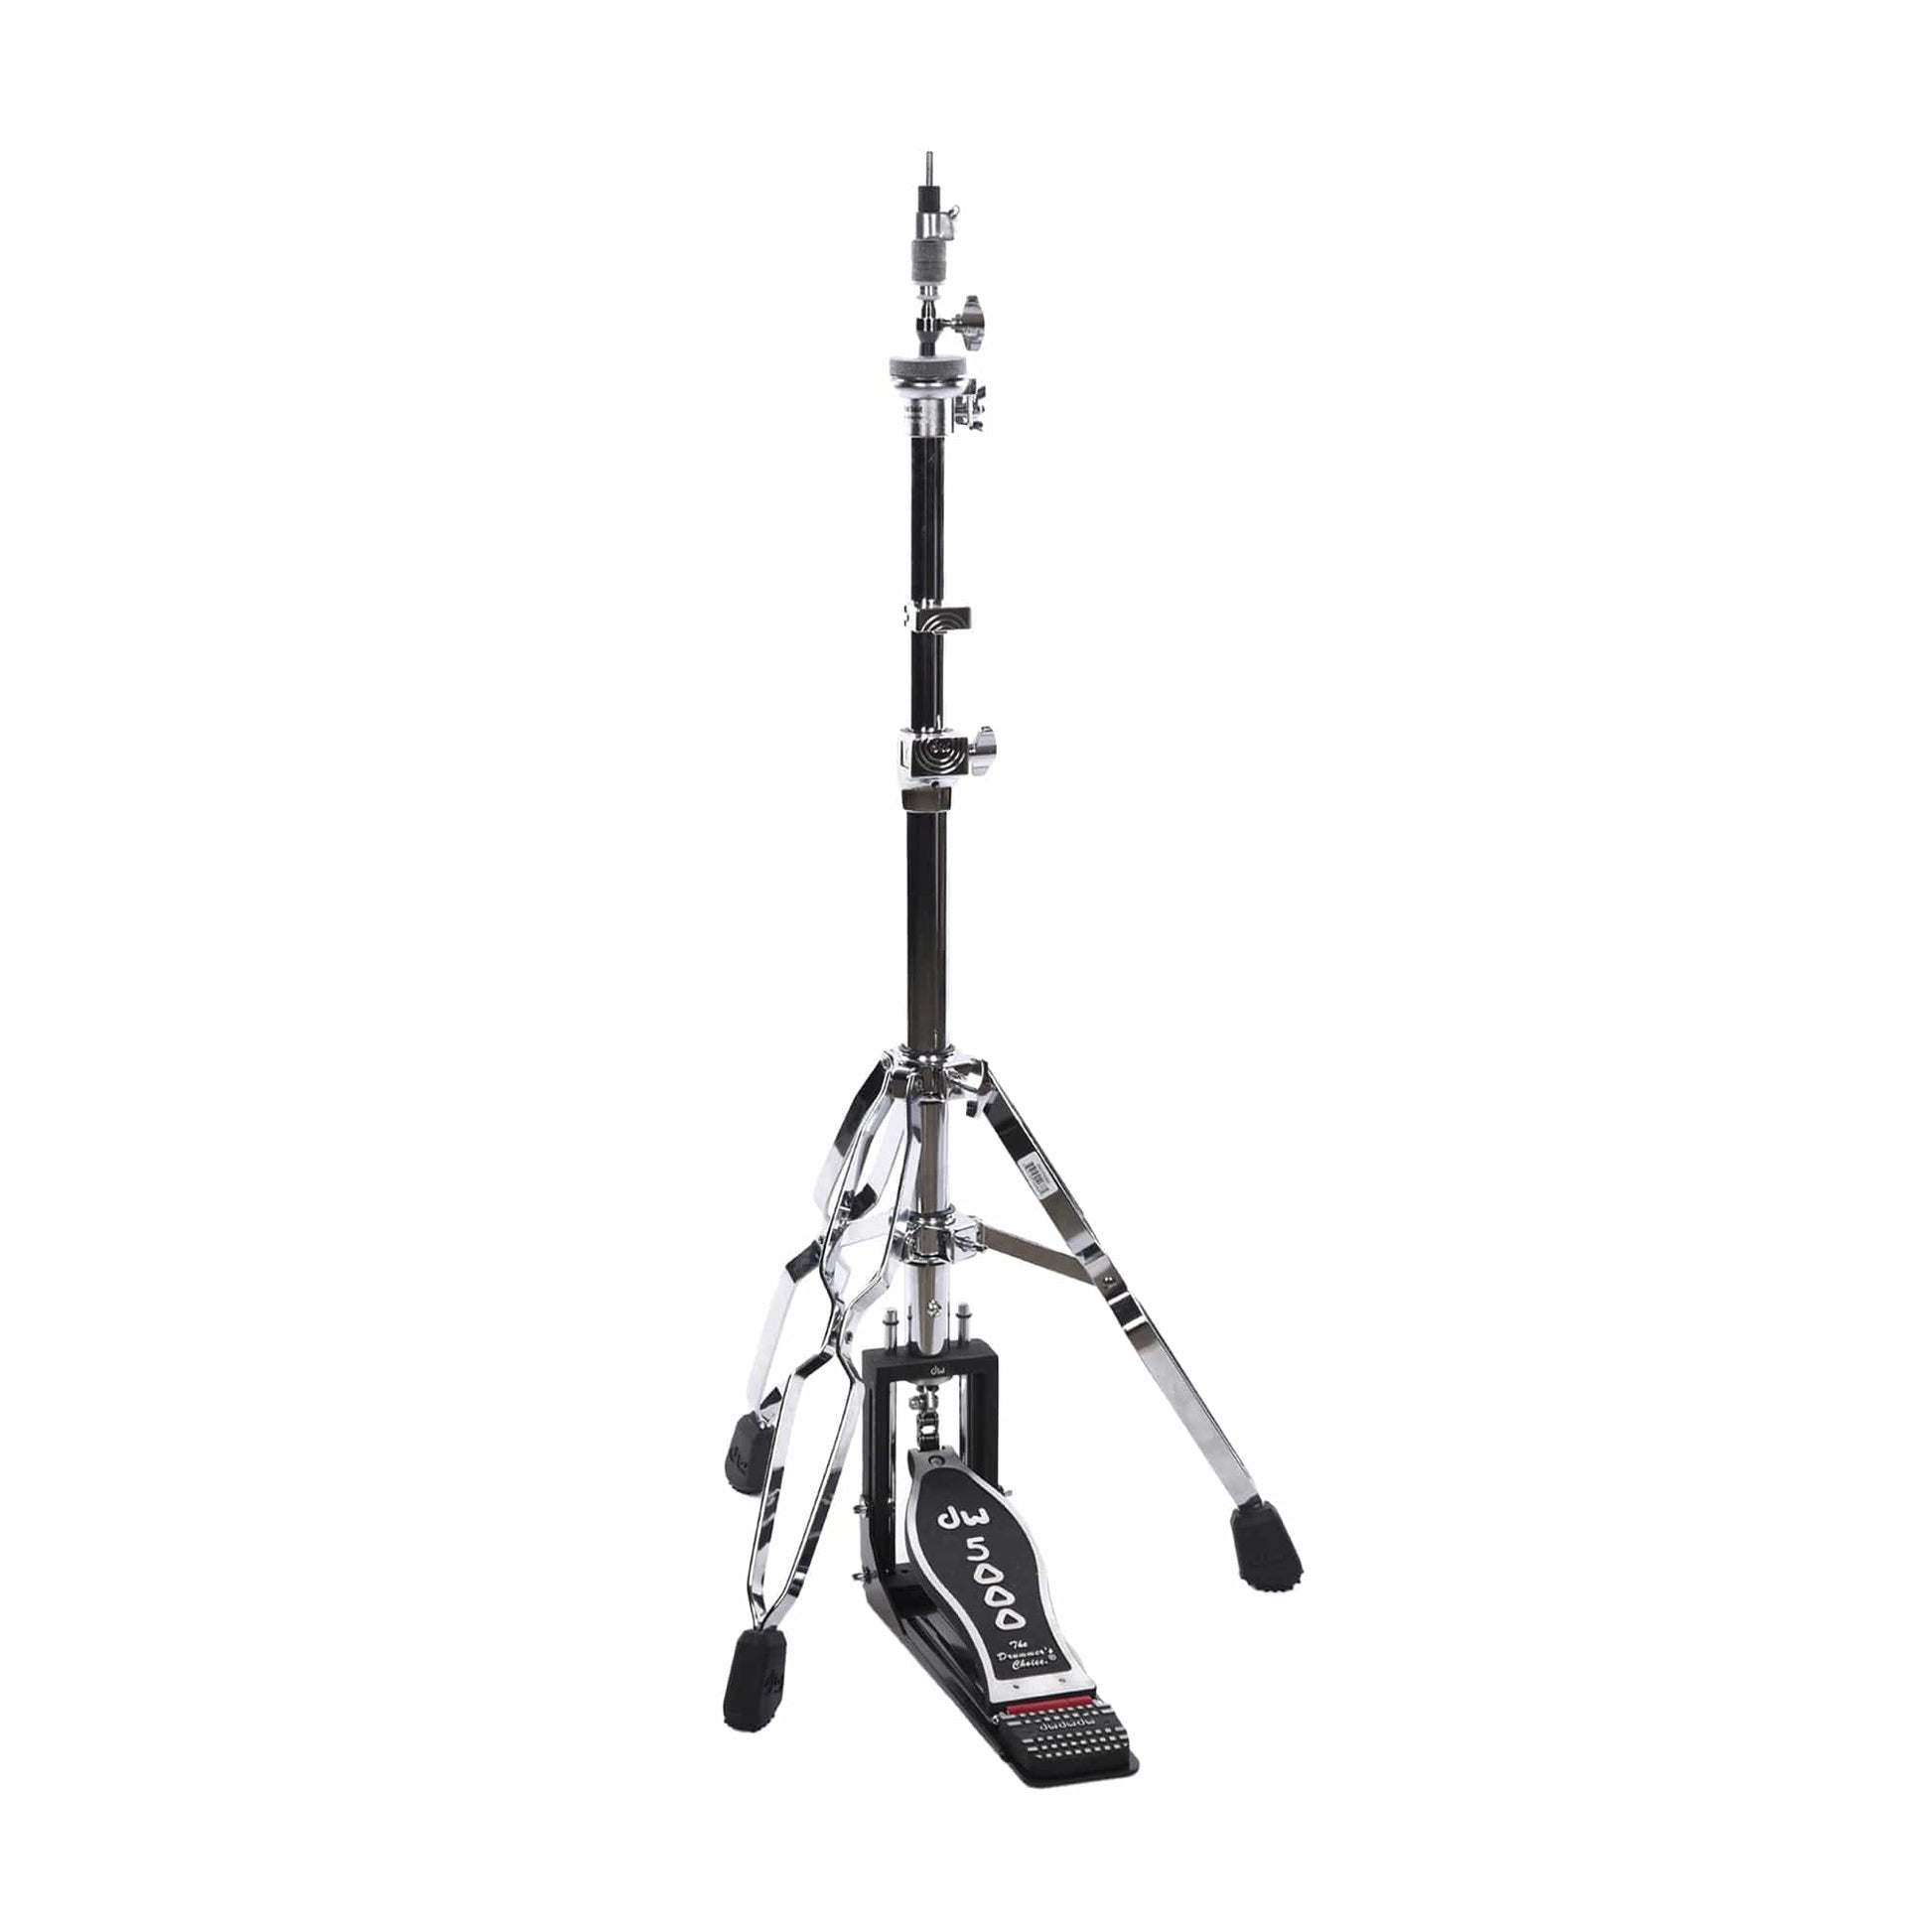 DW 5500D Delta II 3-Leg Hi-Hat Stand Drums and Percussion / Parts and Accessories / Stands